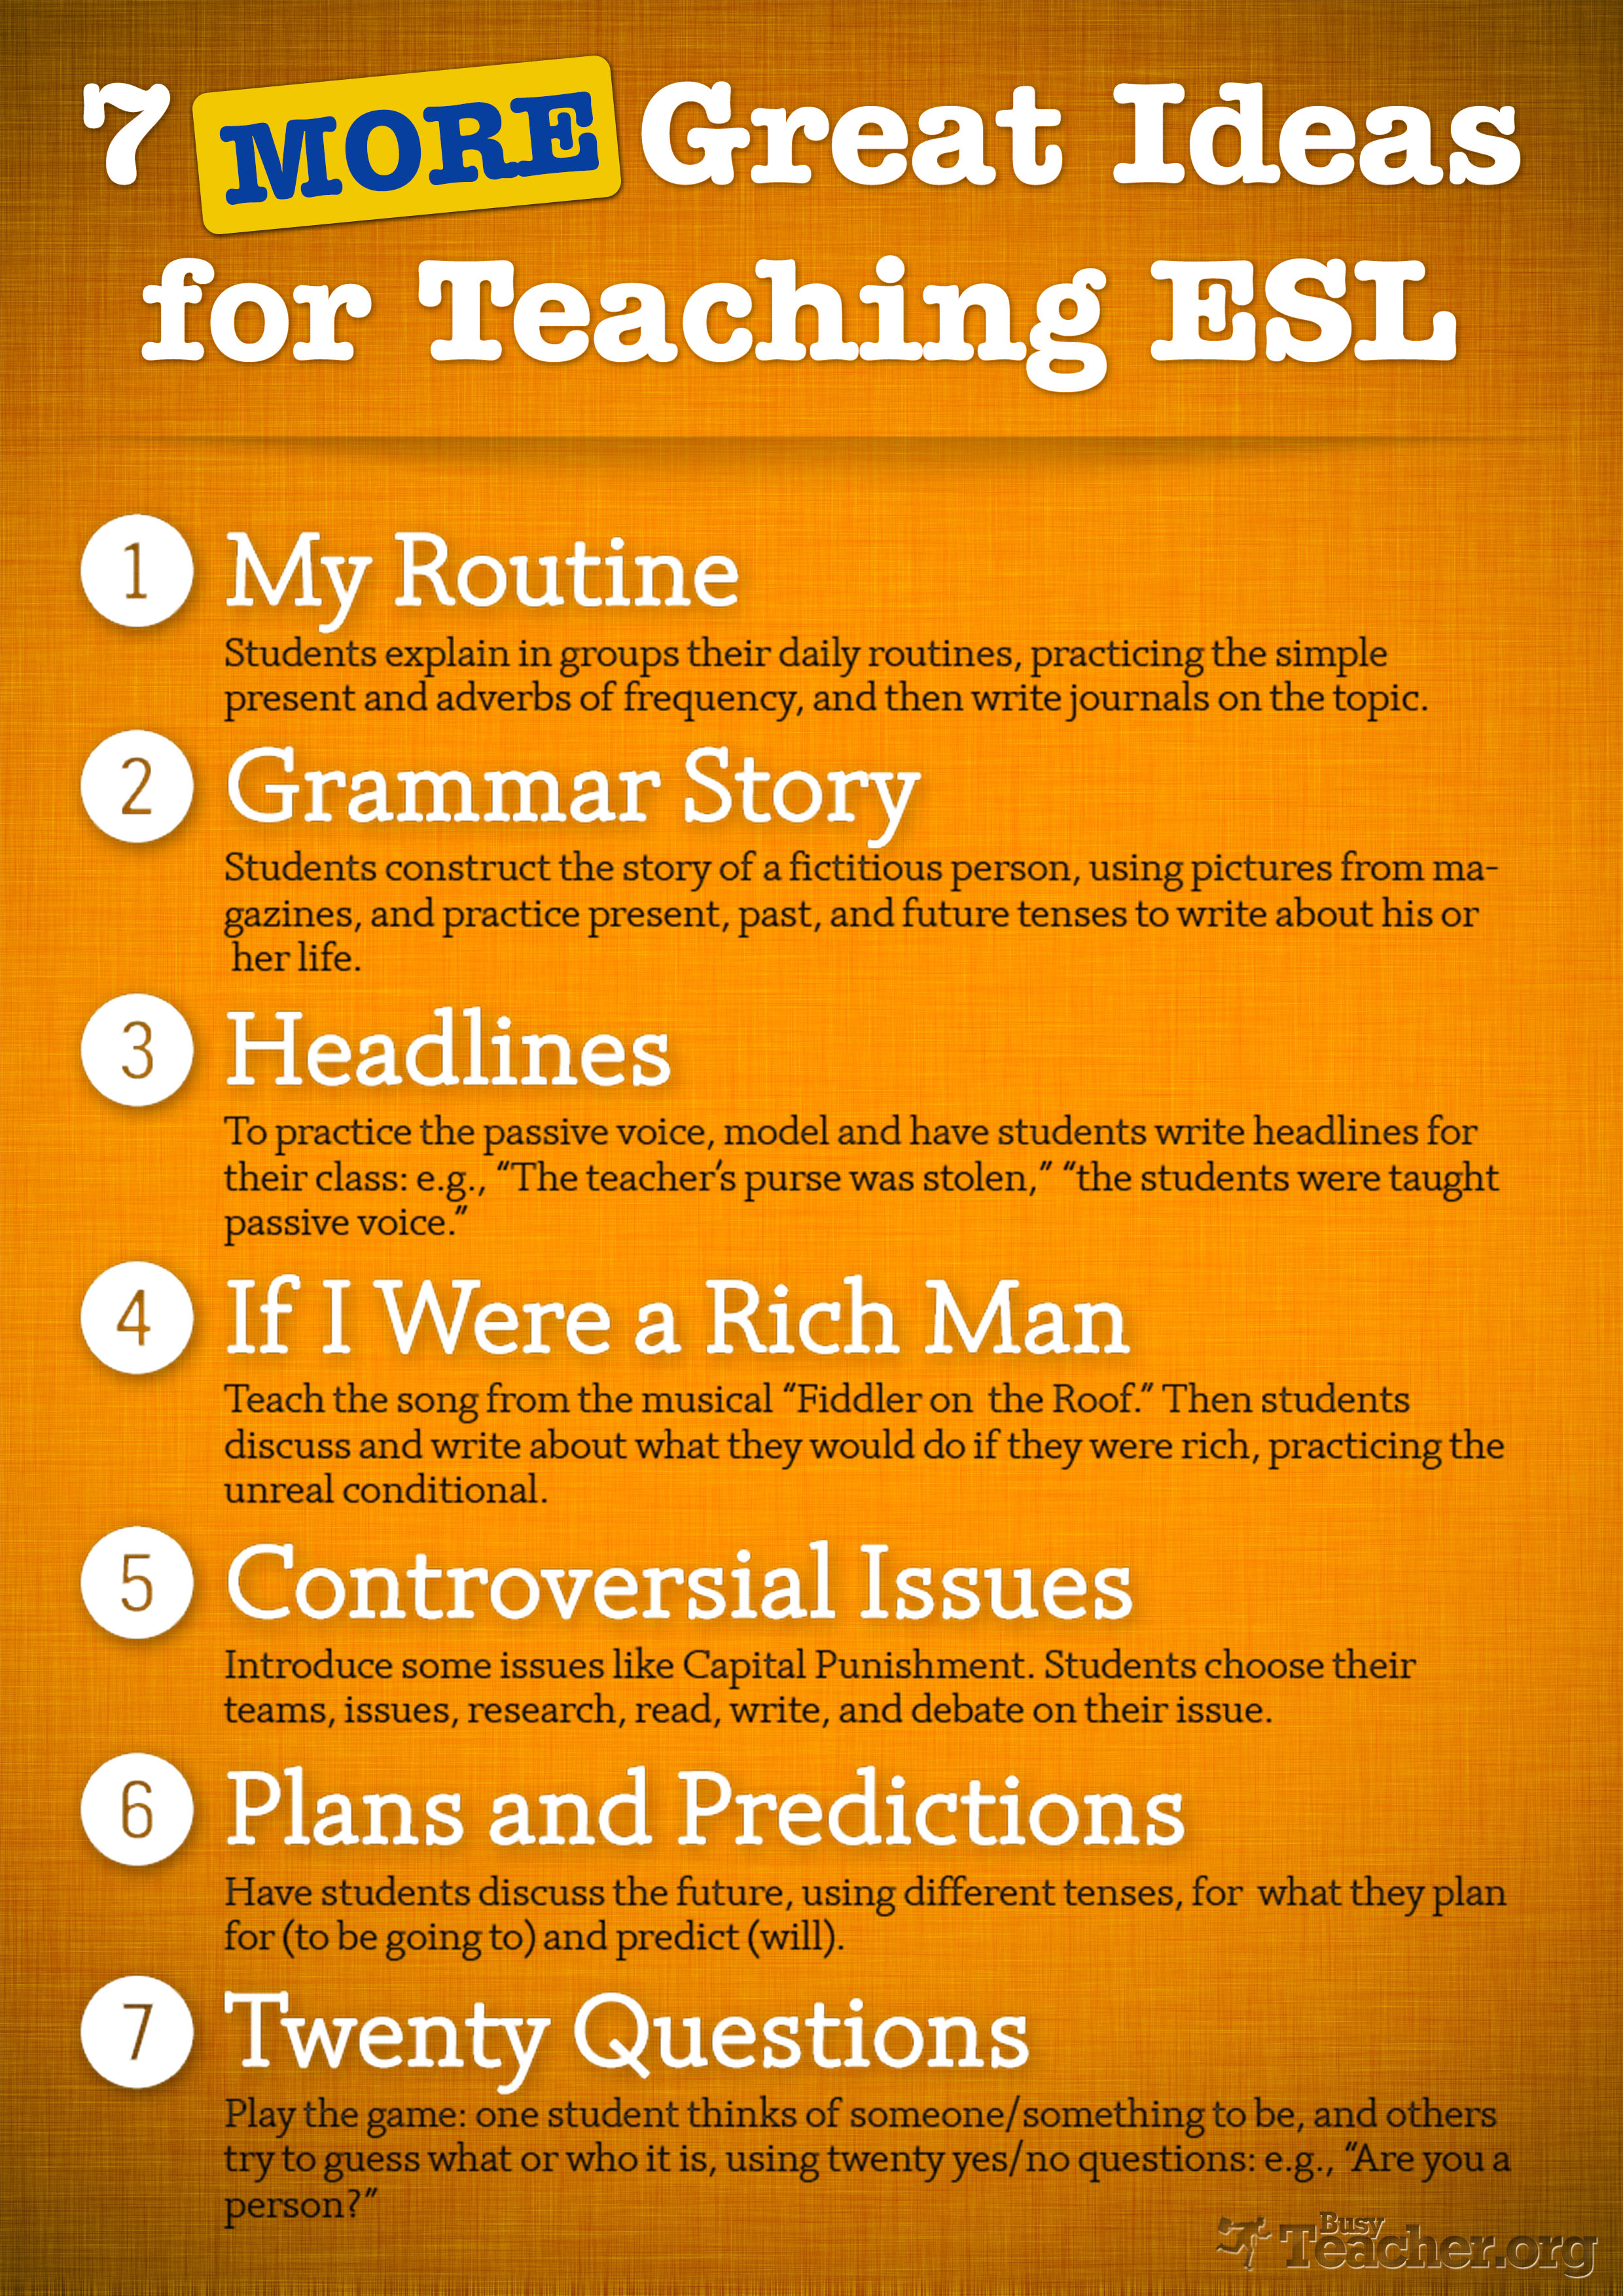 7-more-great-ideas-for-teaching-esl-poster